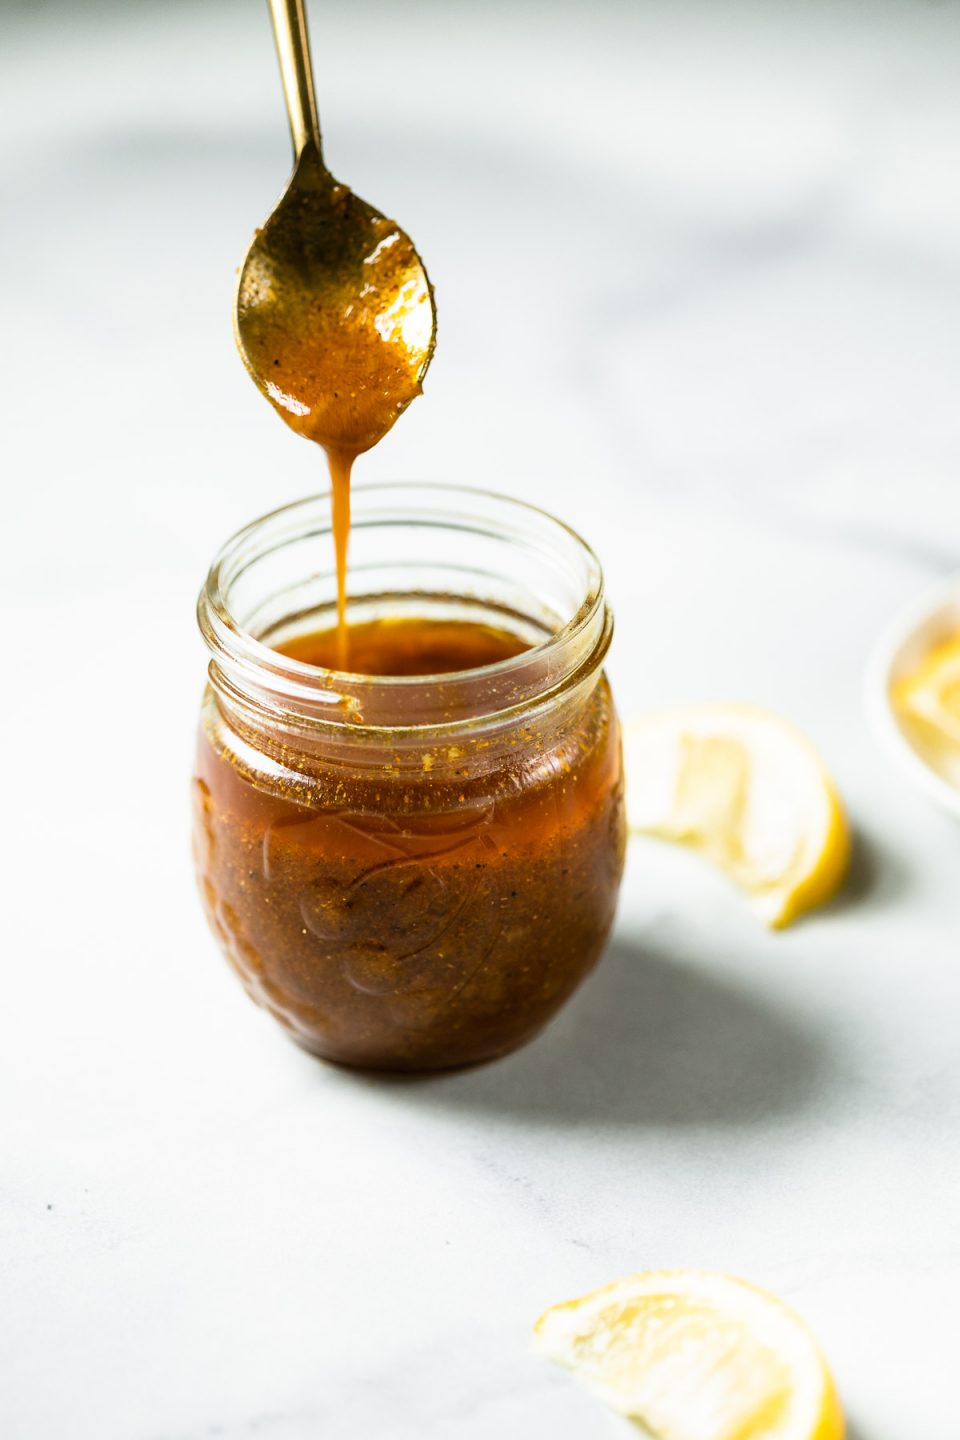 Curry vinaigrette in a small glass jar, with a golden spoon drizzling some of the vinaigrette into the jar. The jar is surrounded by sliced lemon wedges.